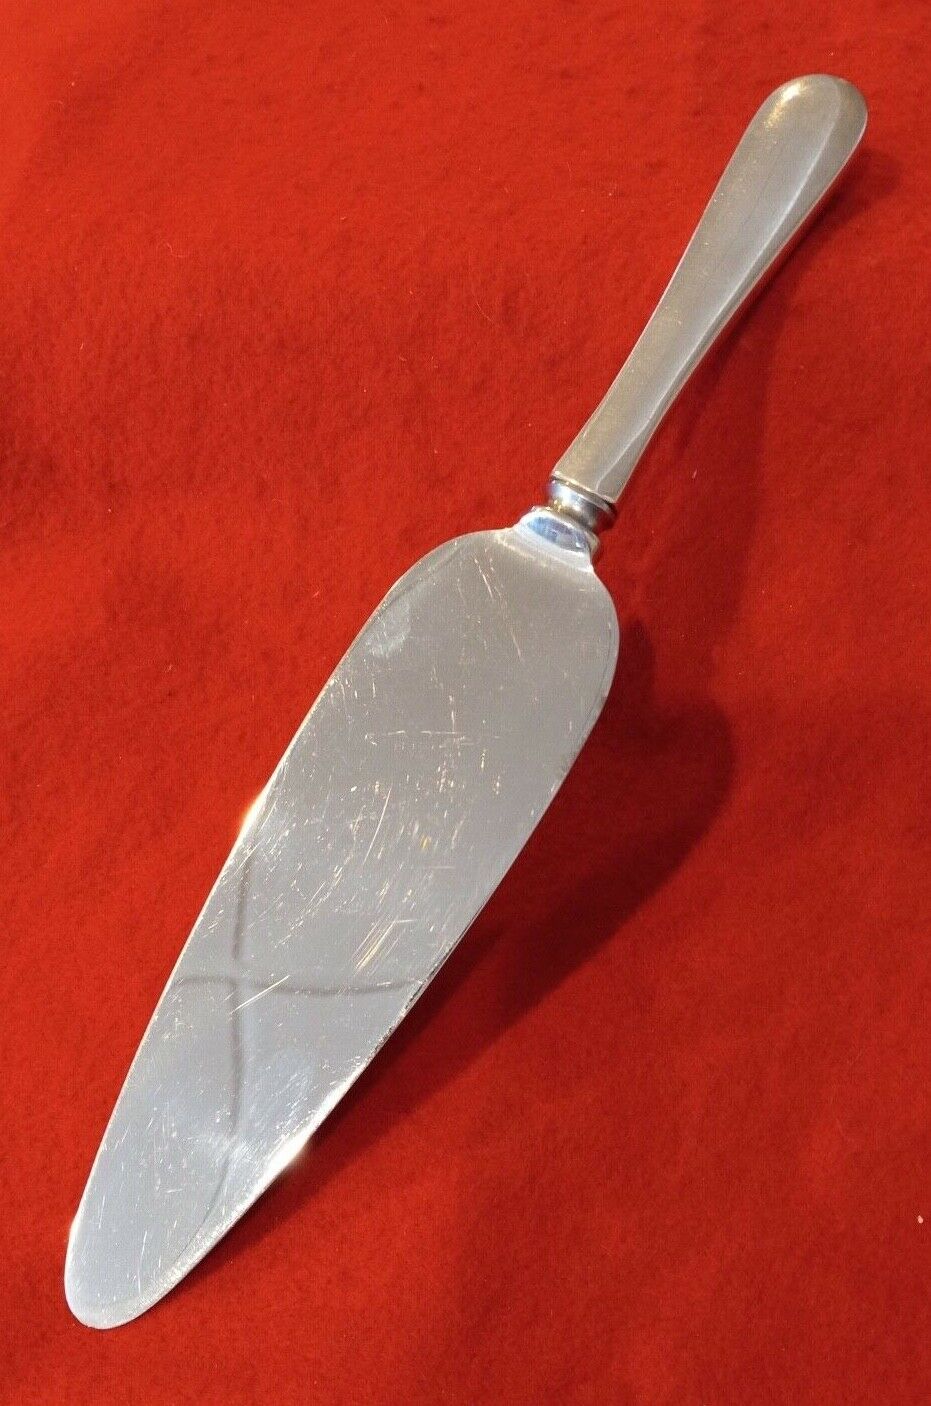 STERLING SILVER HOLLOW HANDLE 9 3/8" CAKE KNIFE BY GEBELEIN - NO MONOGRAM